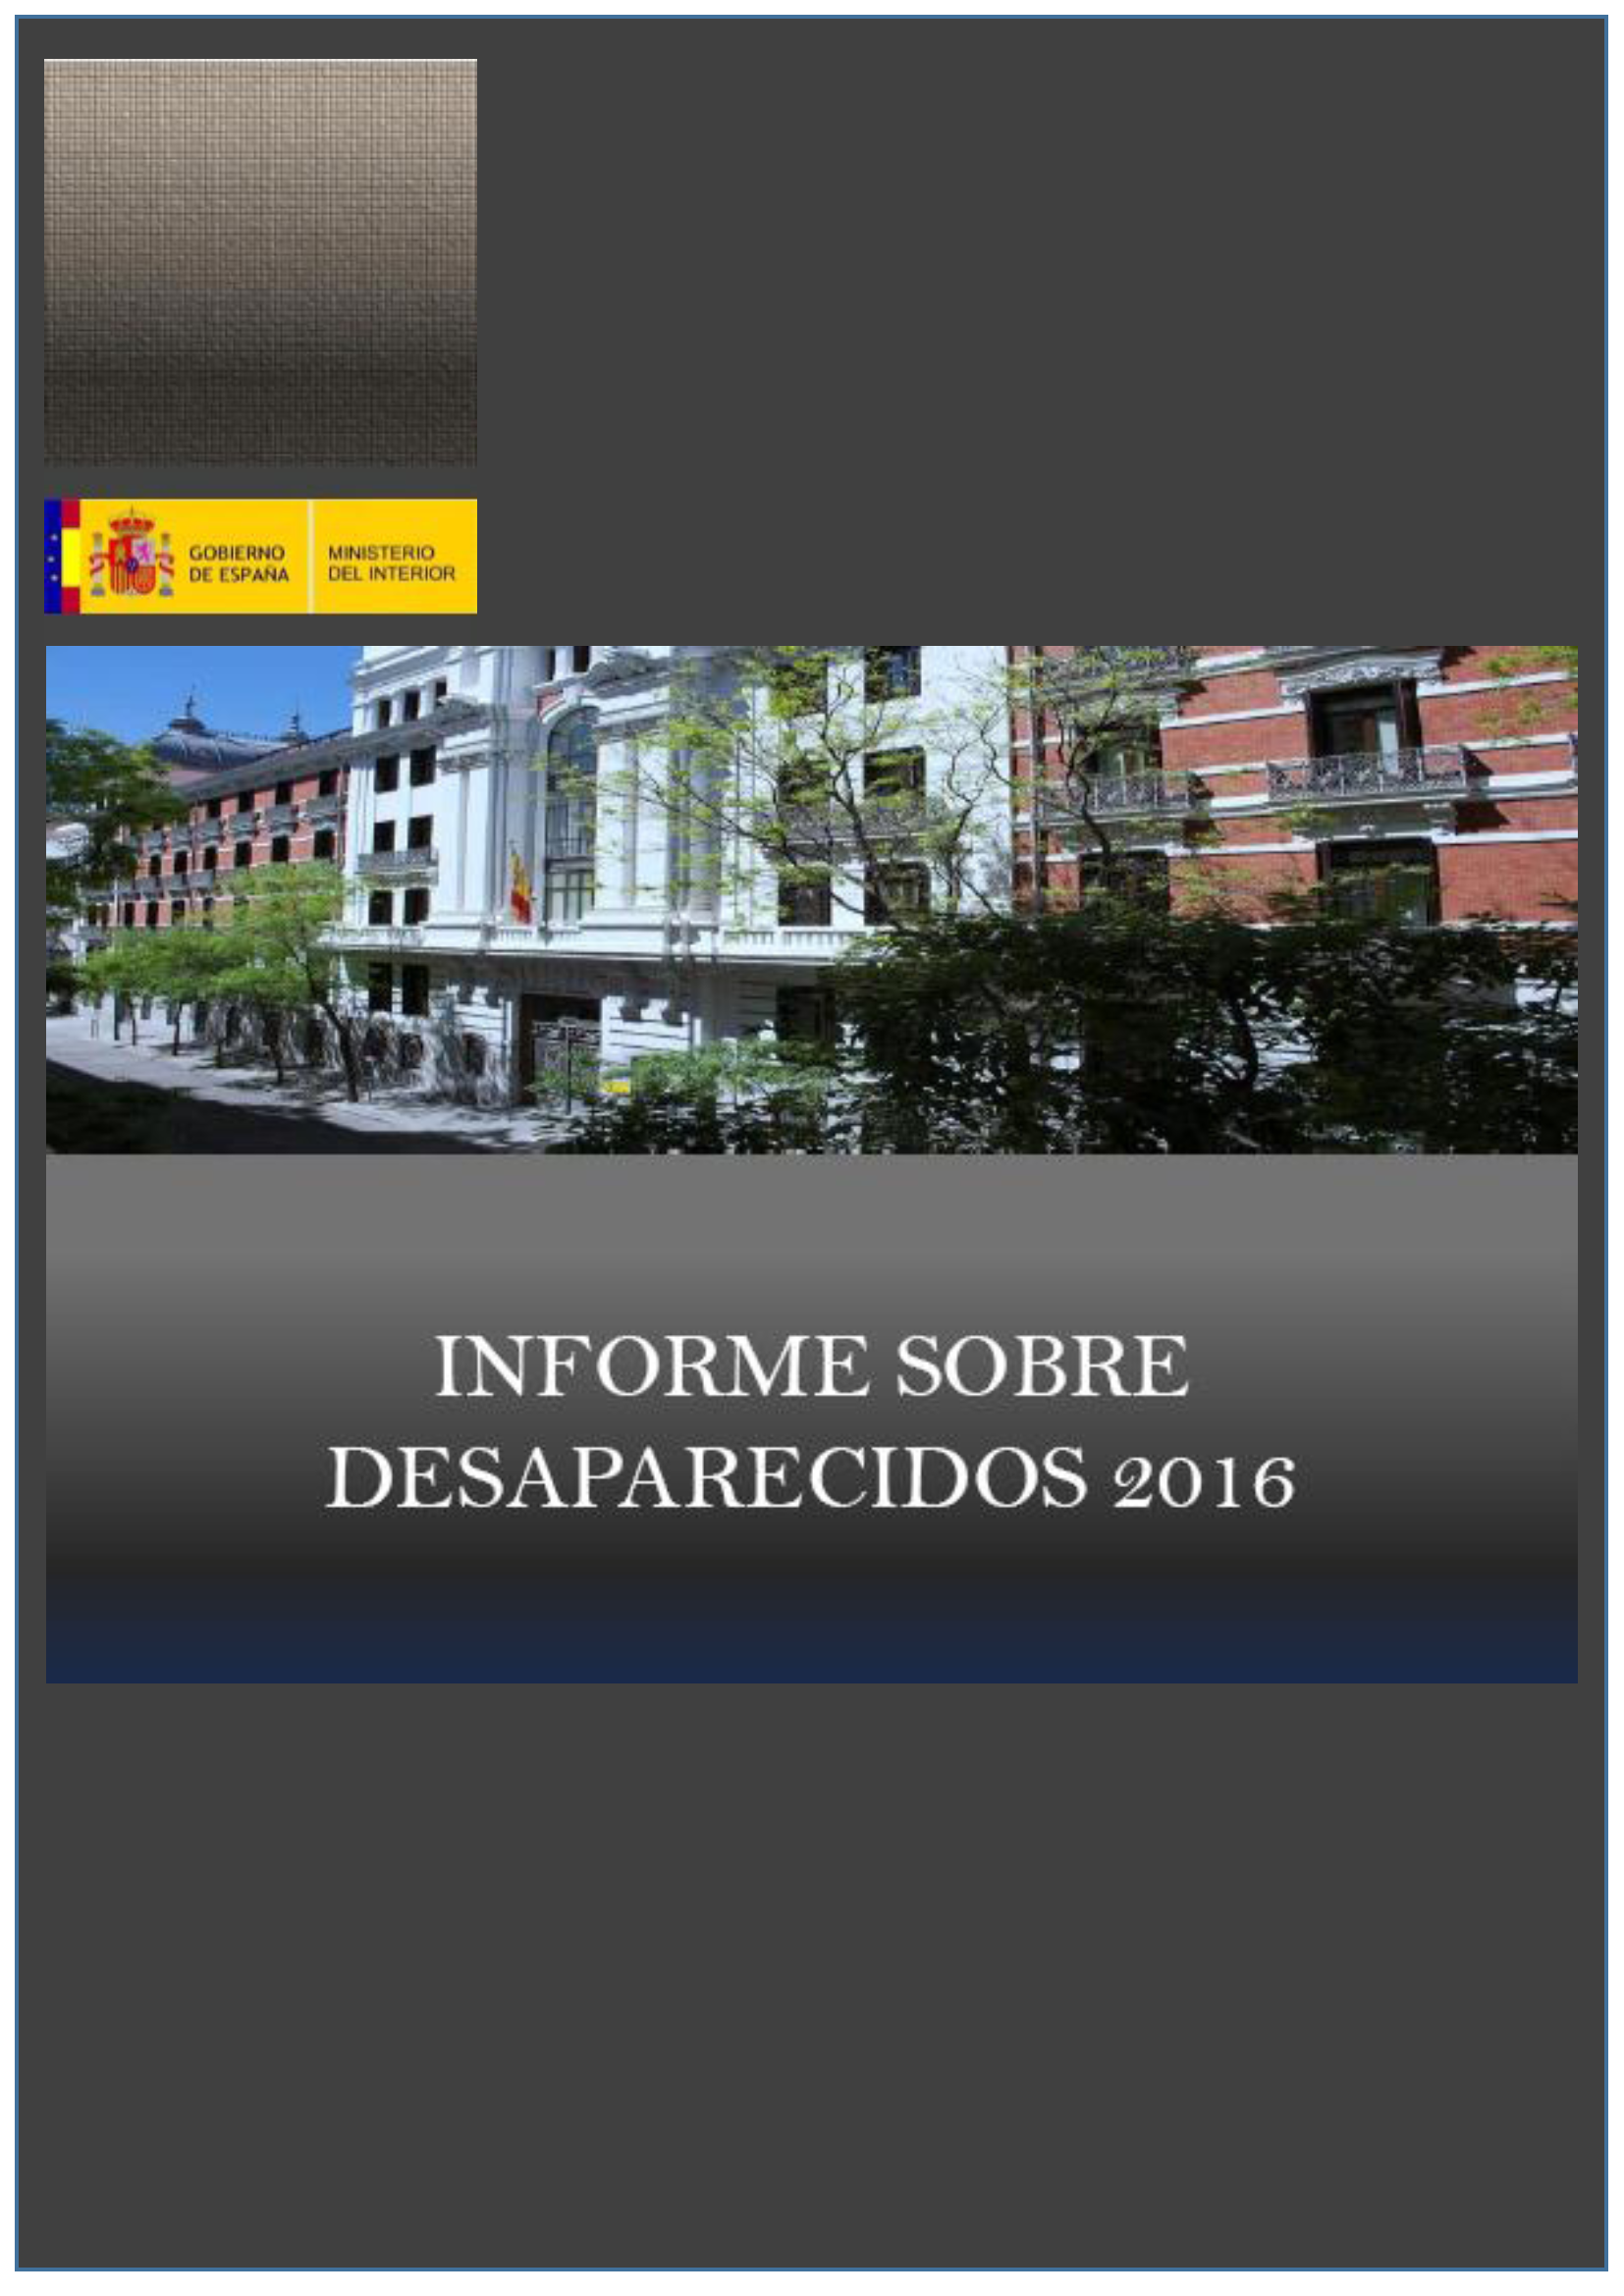 2016 Report on Missing Persons in Spain